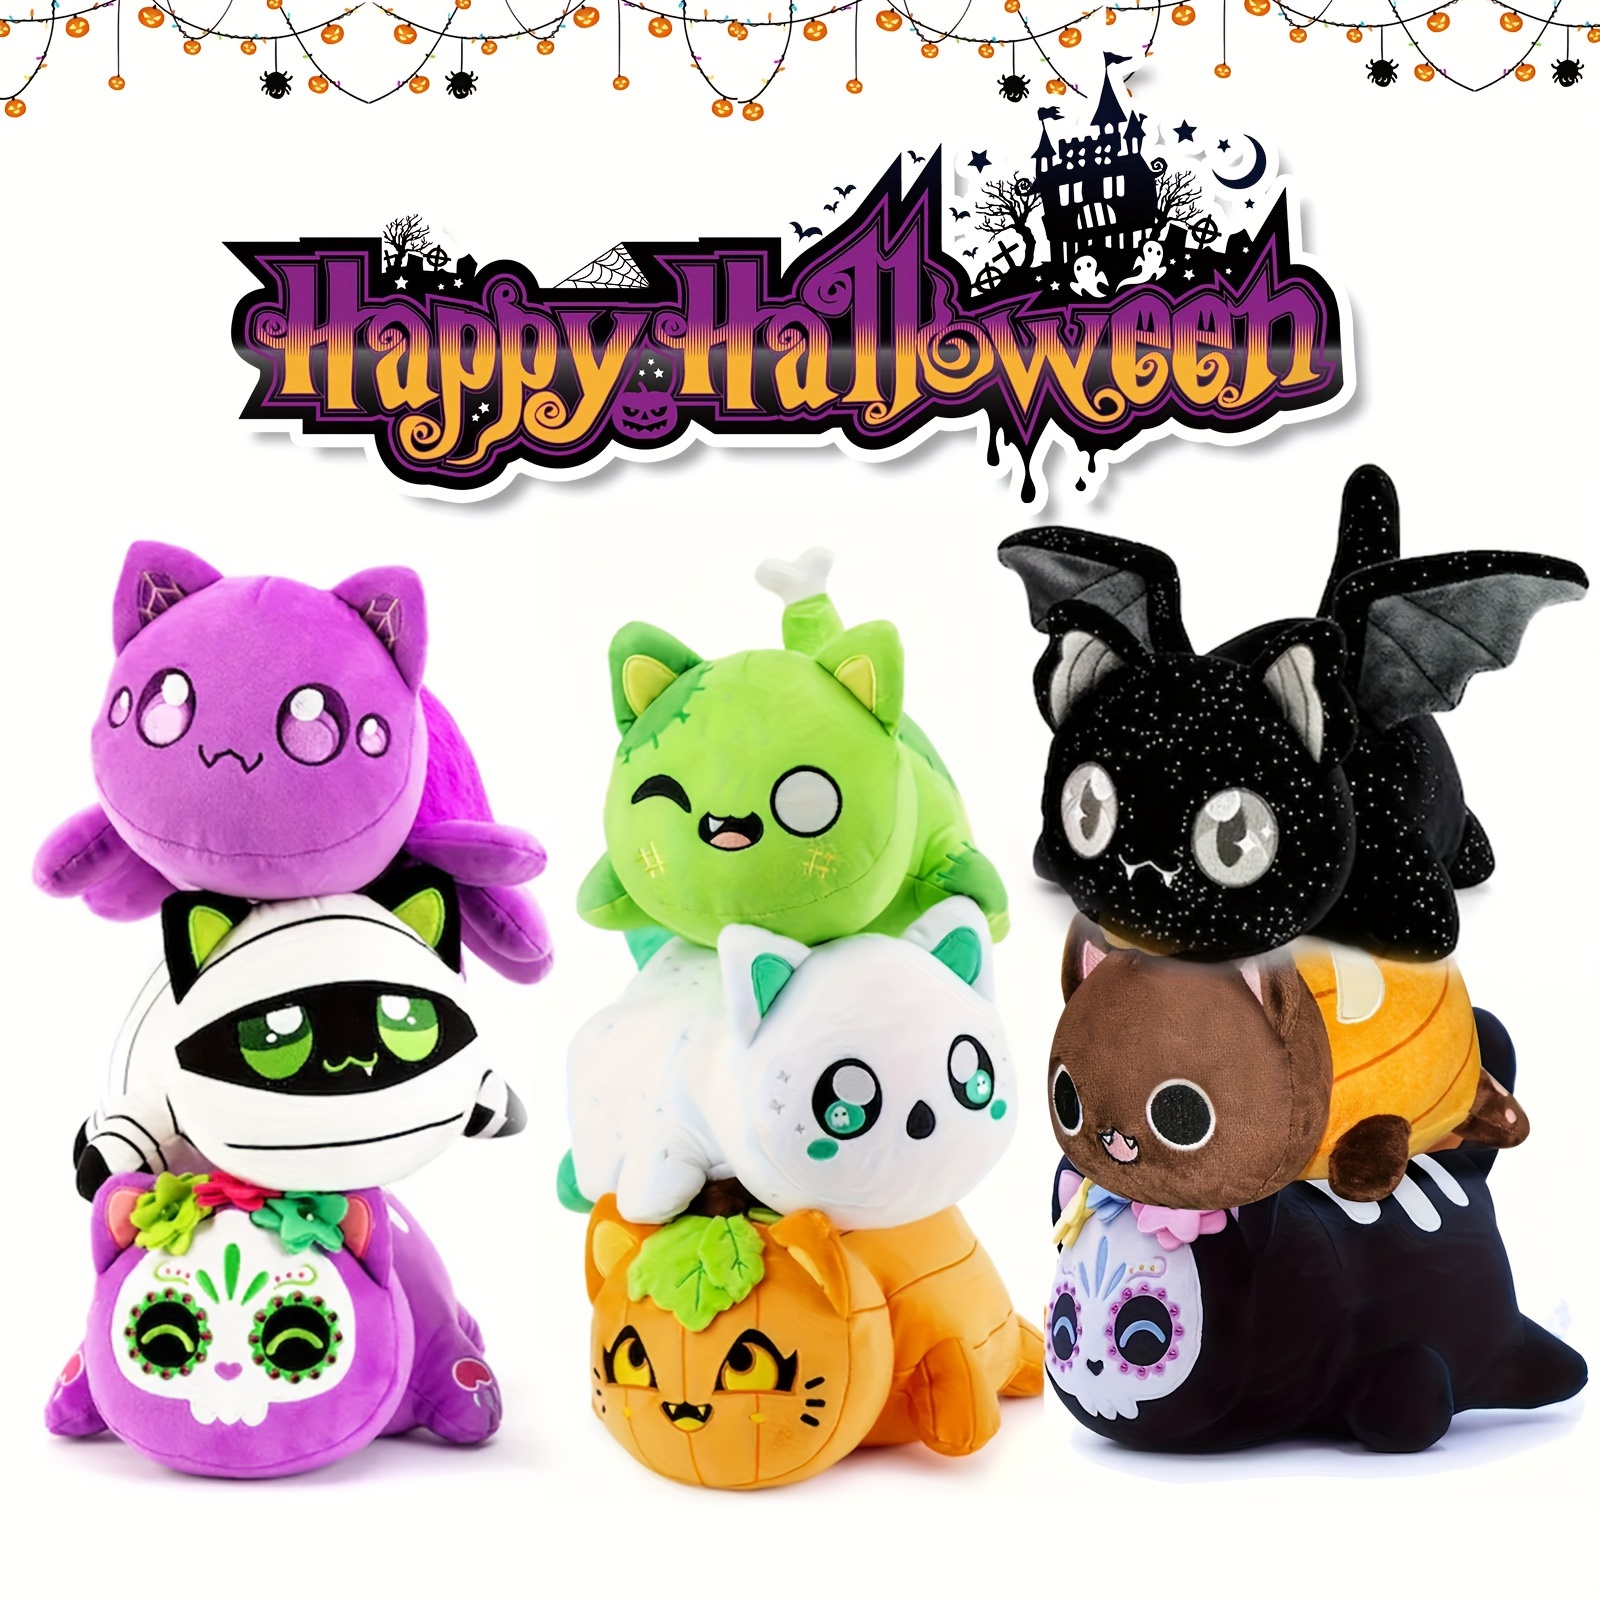 

Halloween Meemeows Cat Plush - Spider Bat Gost Cat Stuffed Animals Collectible Toy, Great Gift For Fans Christmas Decorations, Thanksgiving Gifts